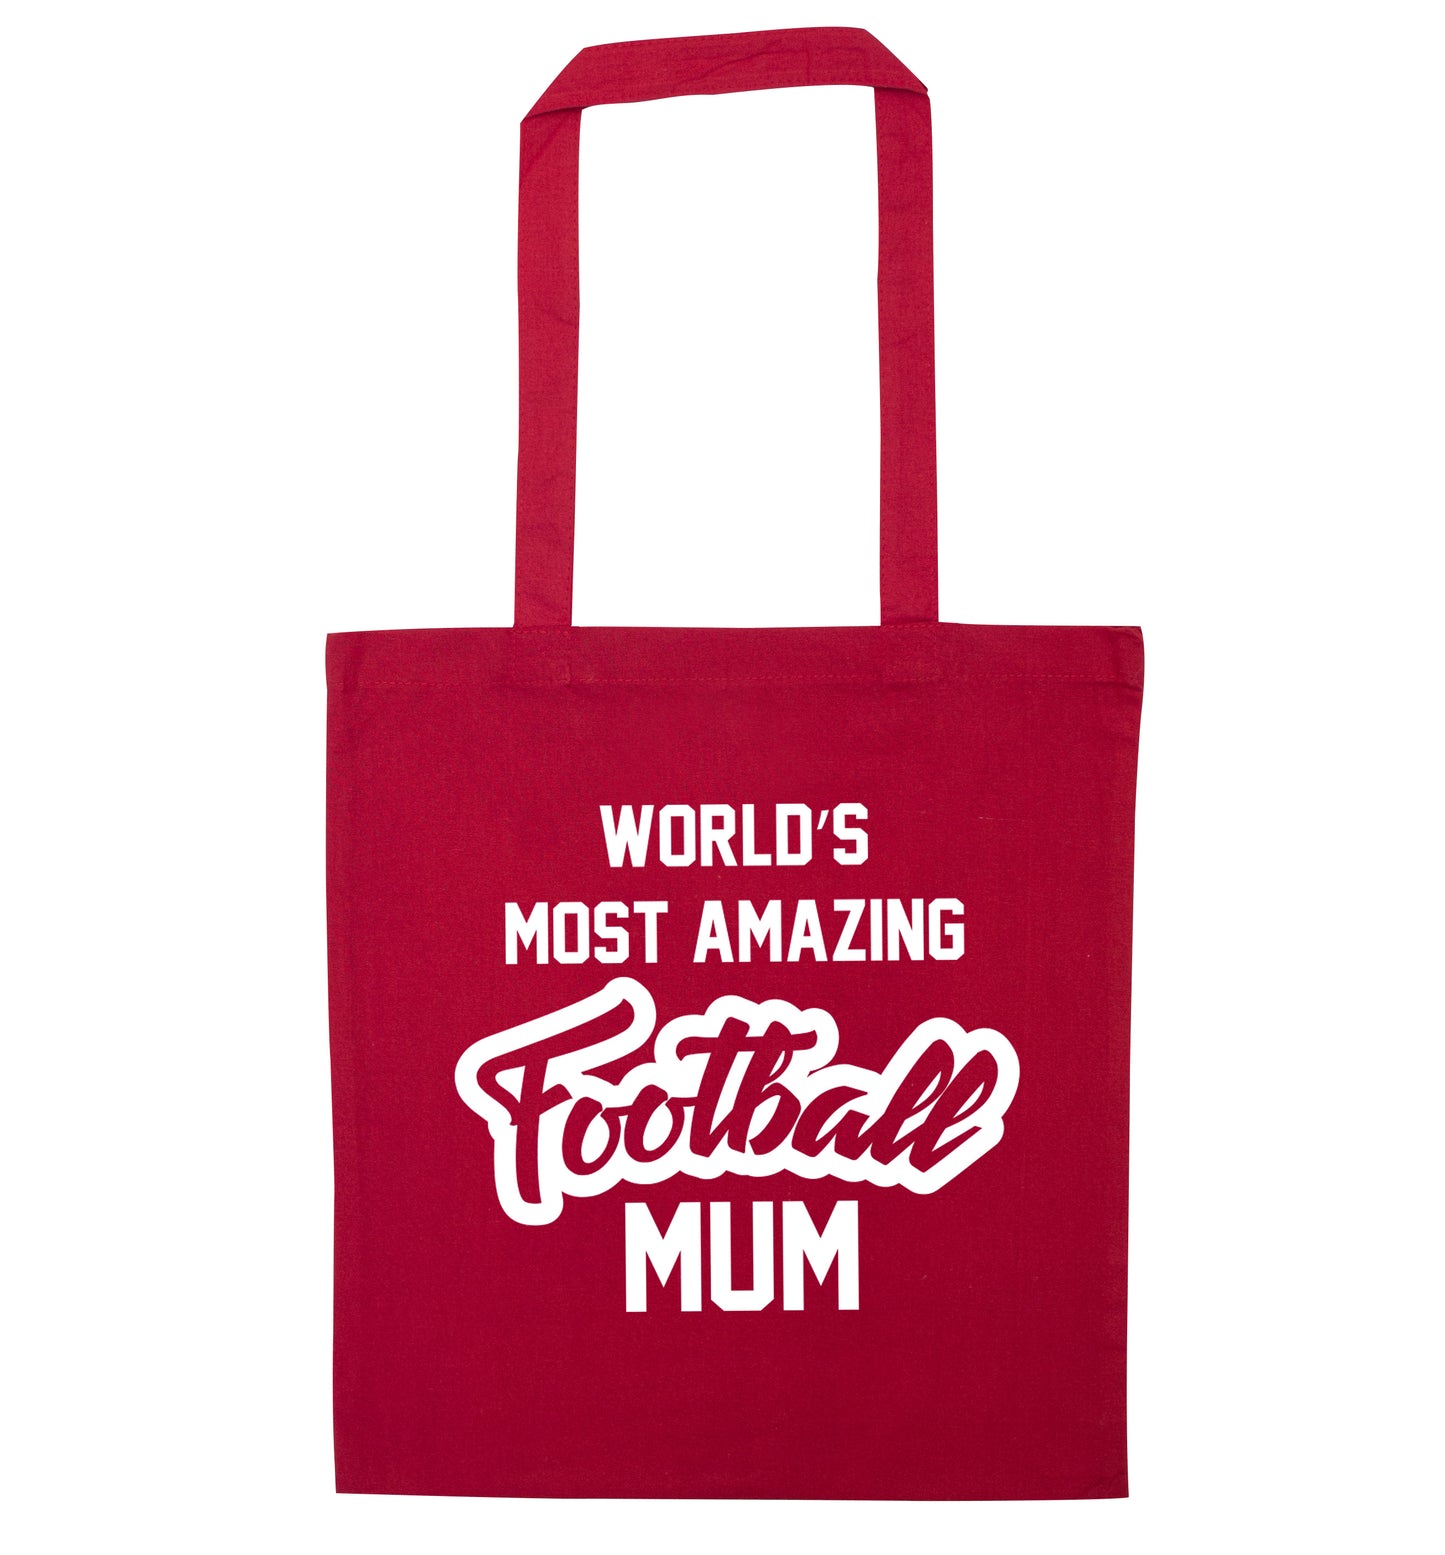 Worlds most amazing football mum red tote bag